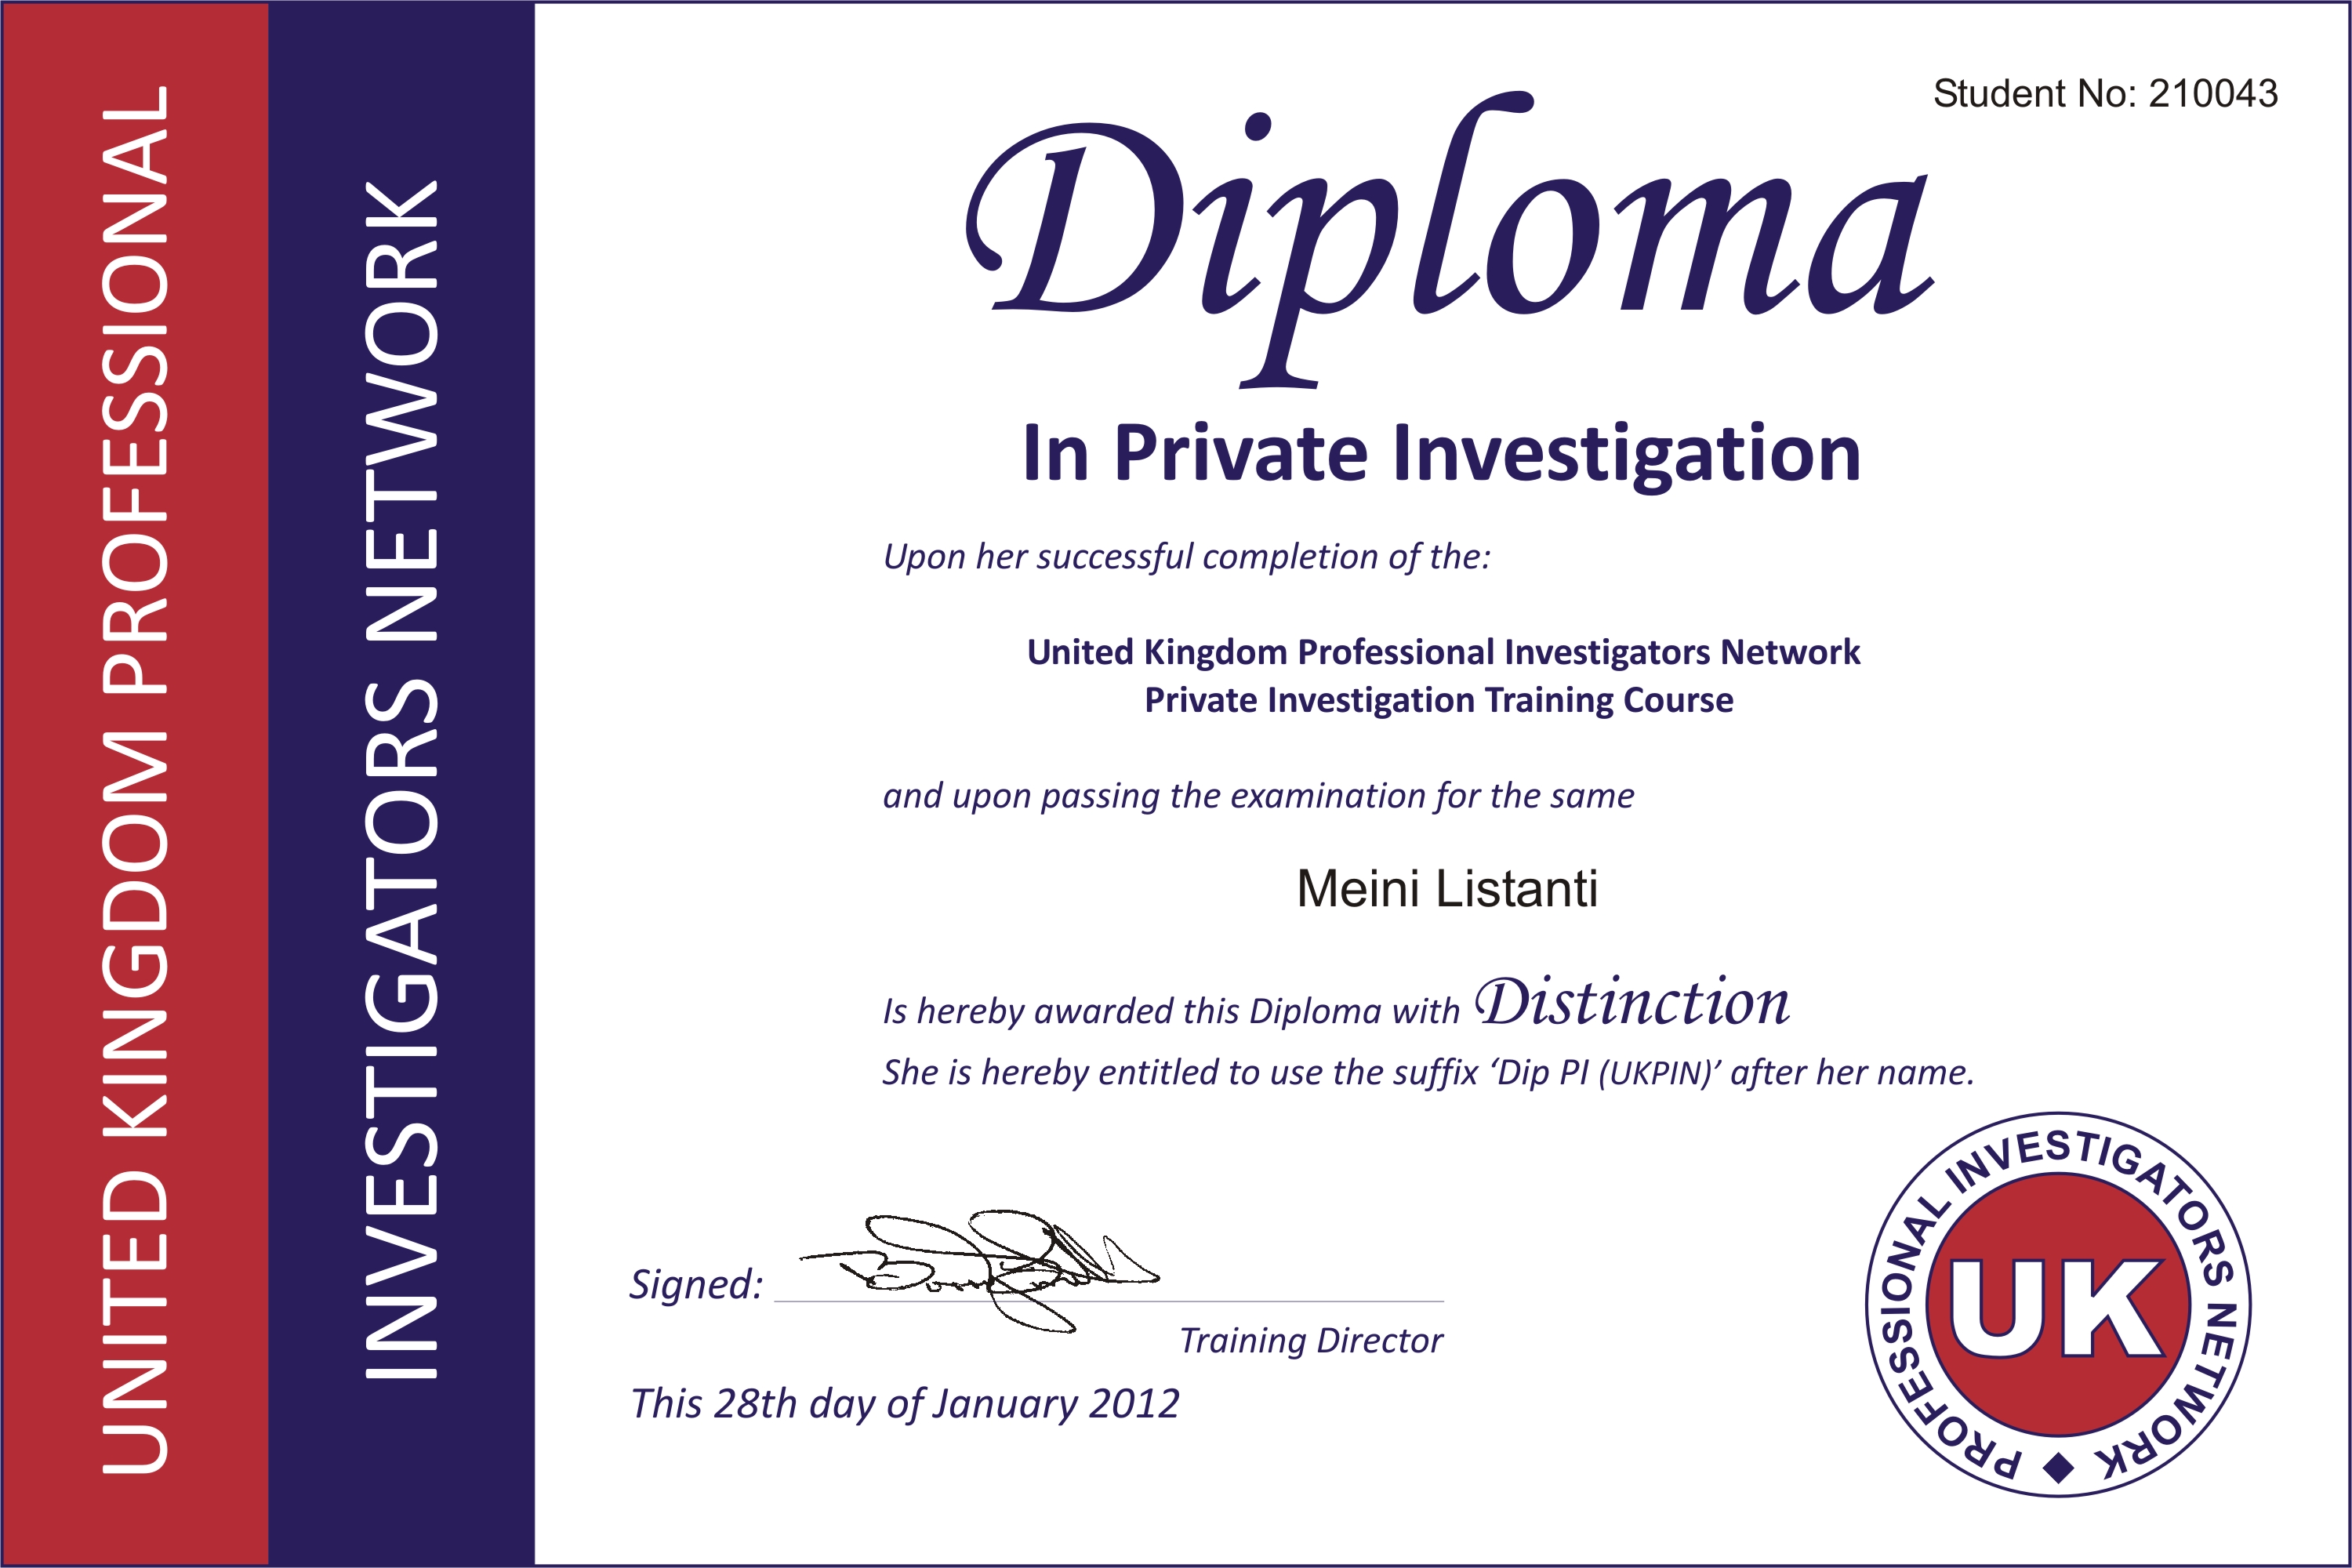 Private certificate. Diploma with distinction.